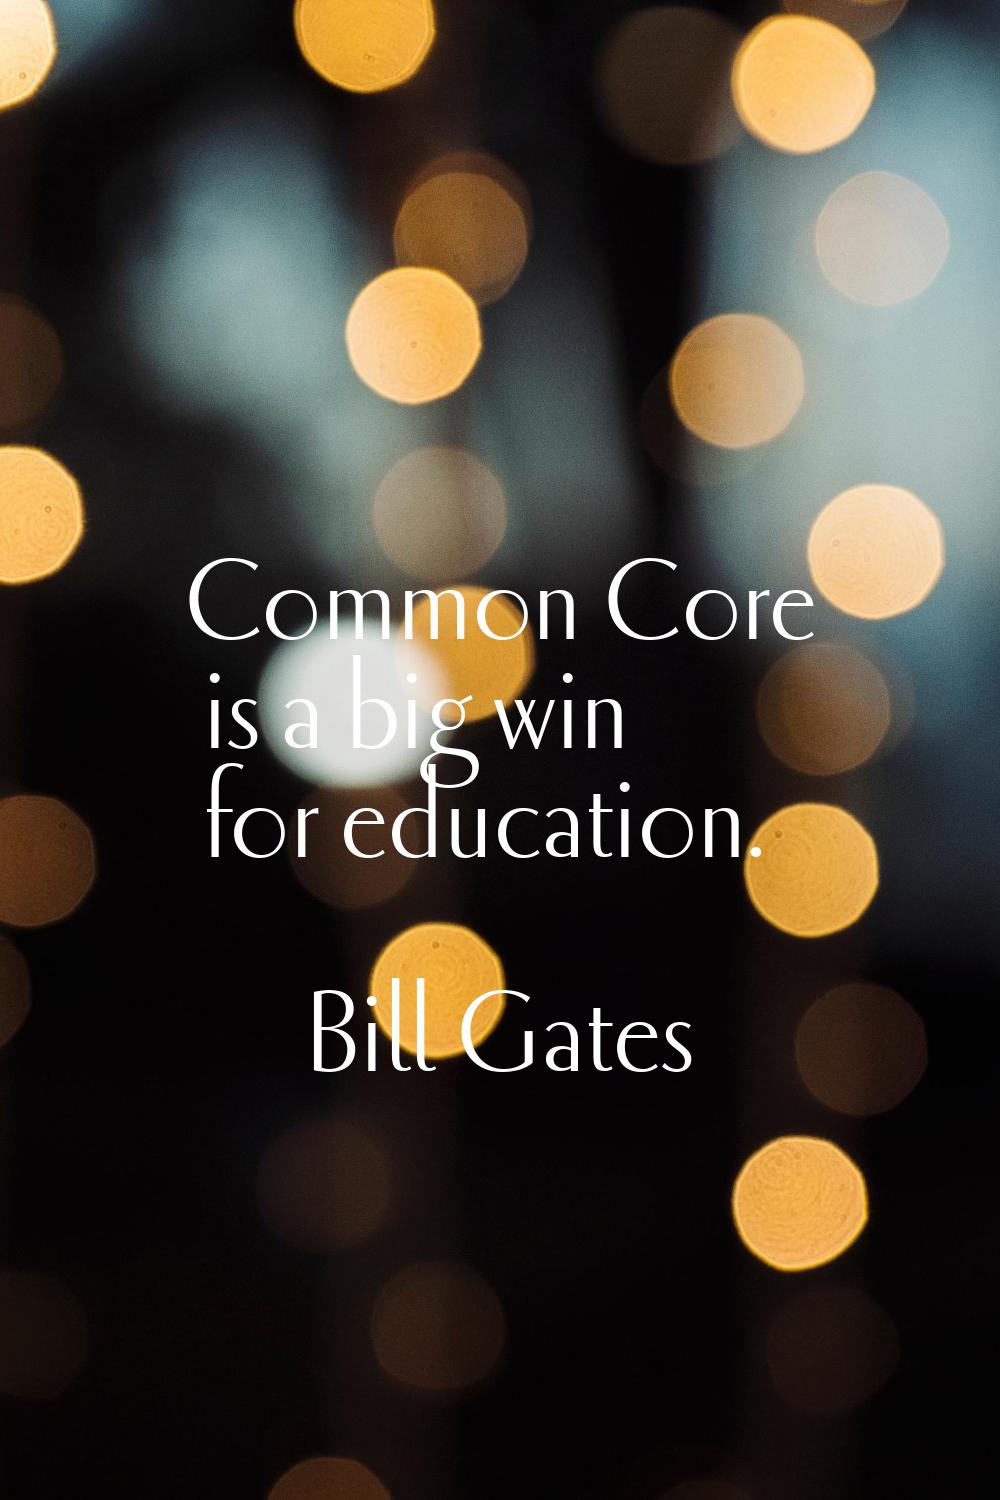 Common Core is a big win for education.